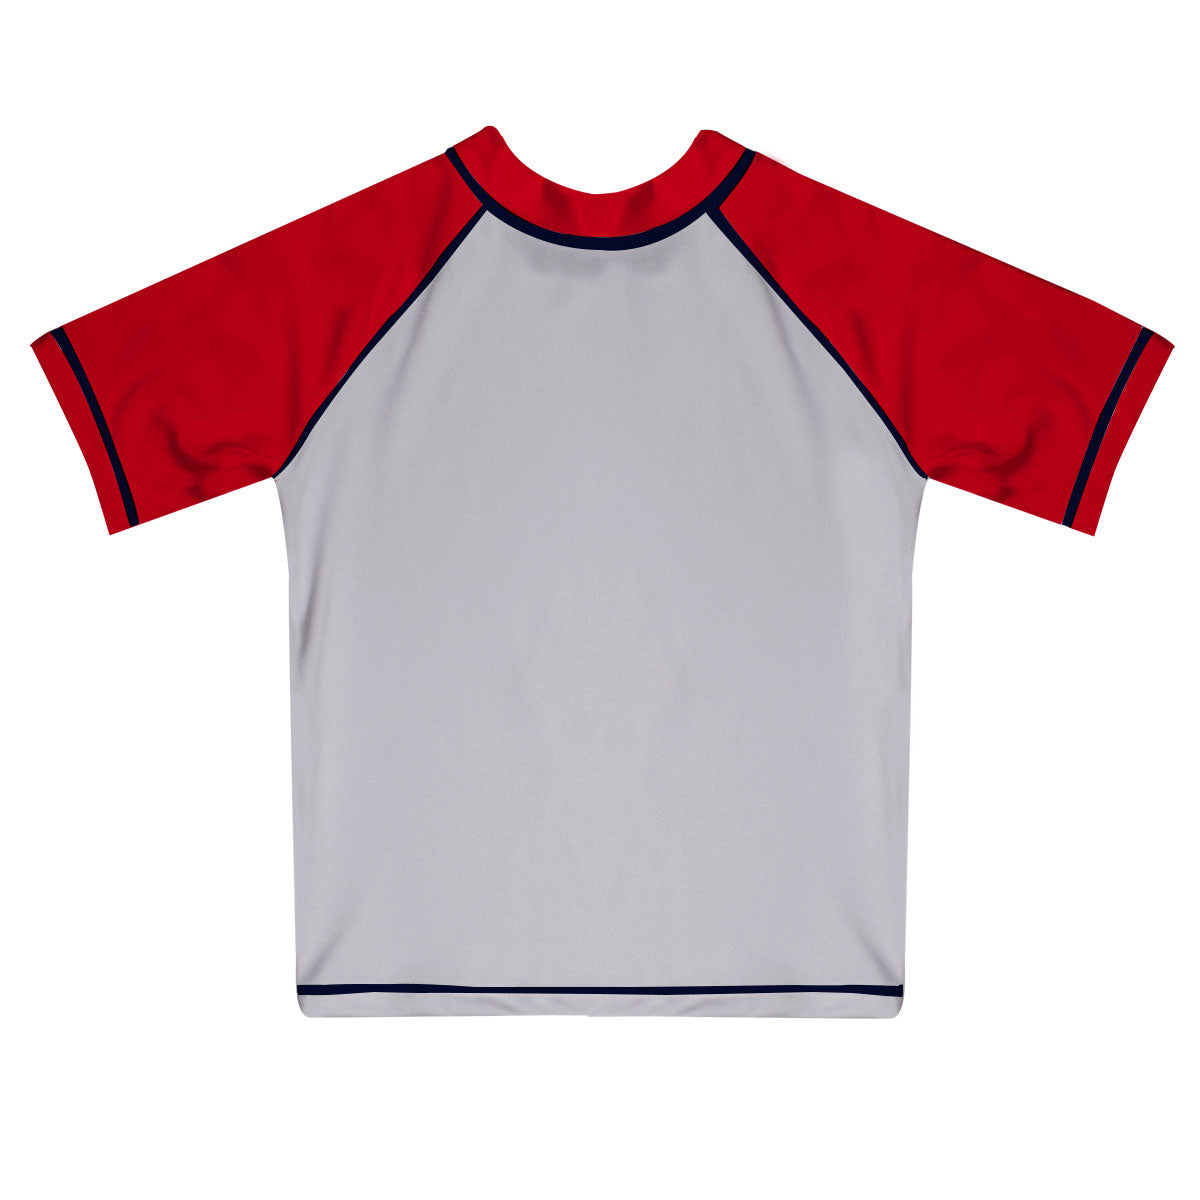 Monogram White and Red Short Sleeve Rash Guard - Wimziy&Co.